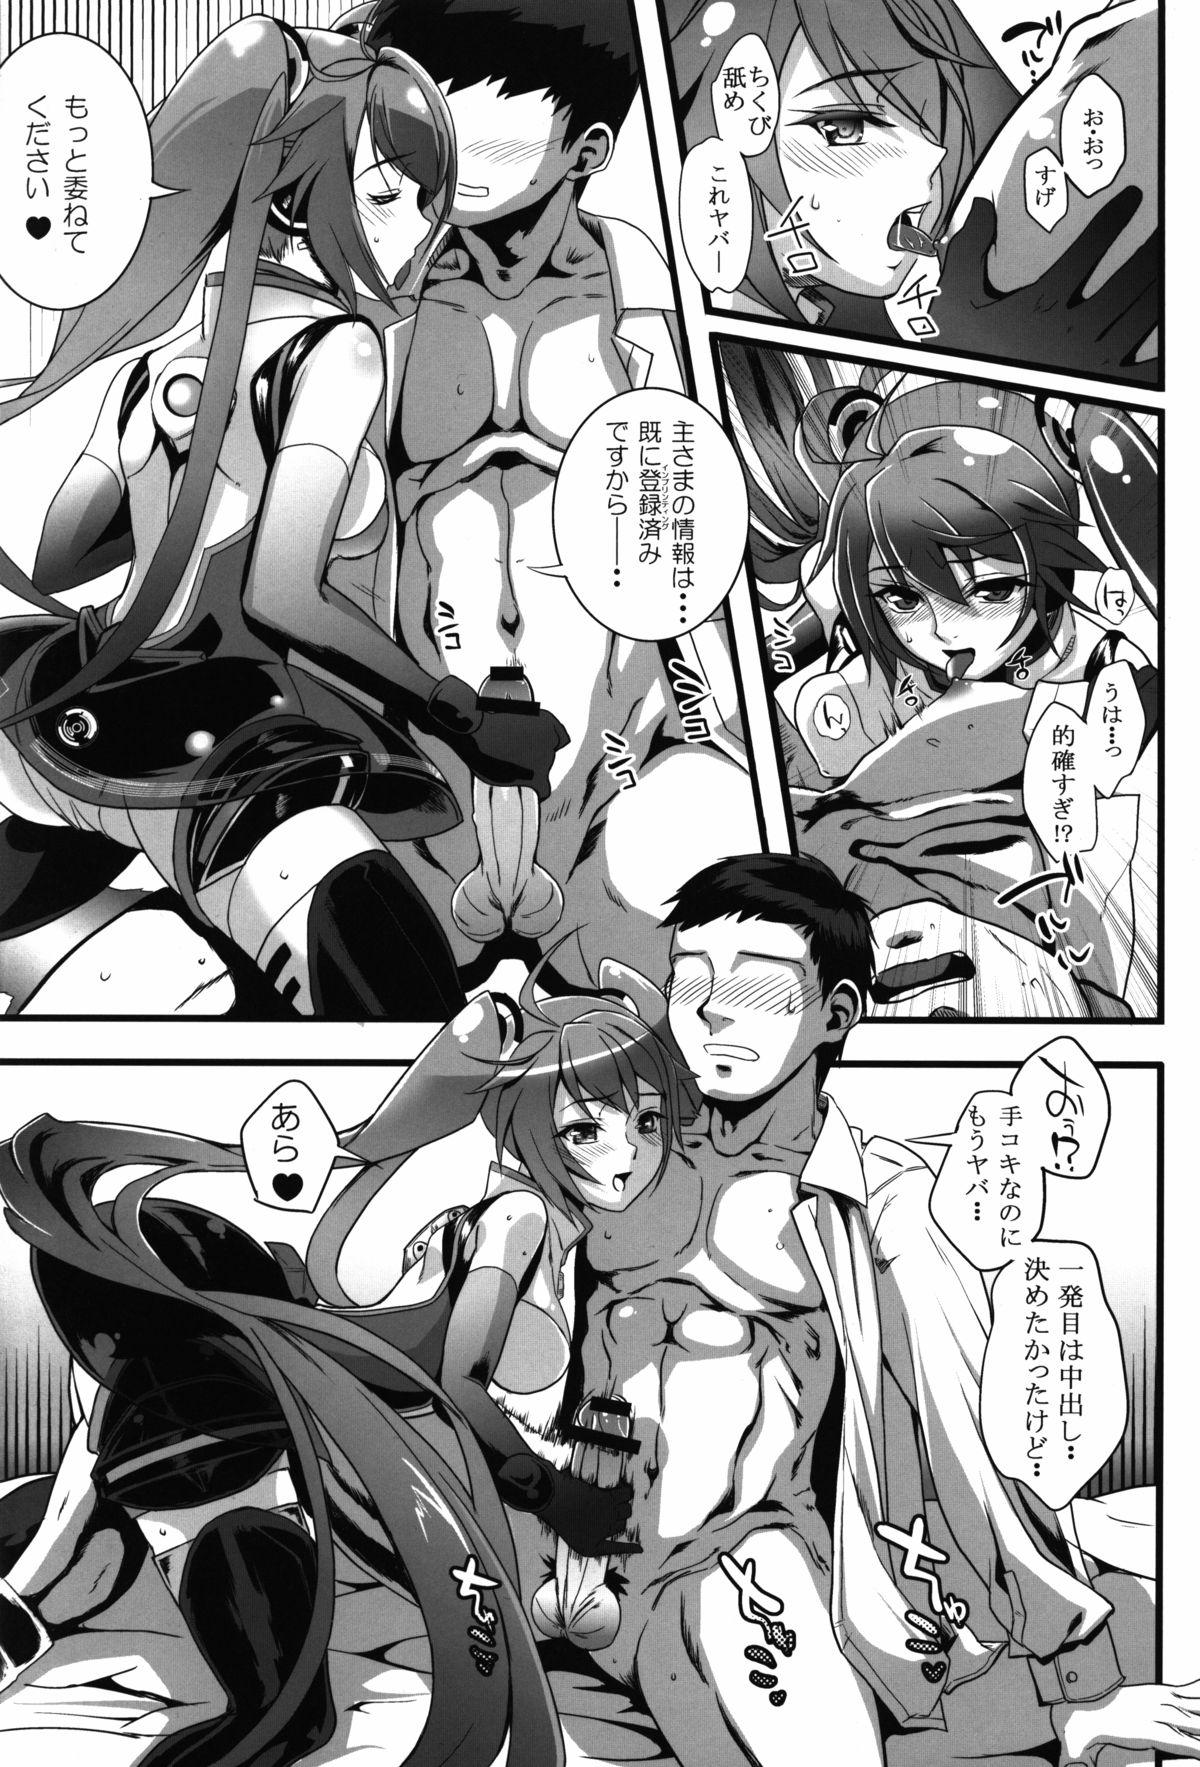 Pareja Racing Angeloid - Vocaloid Passionate - Page 8